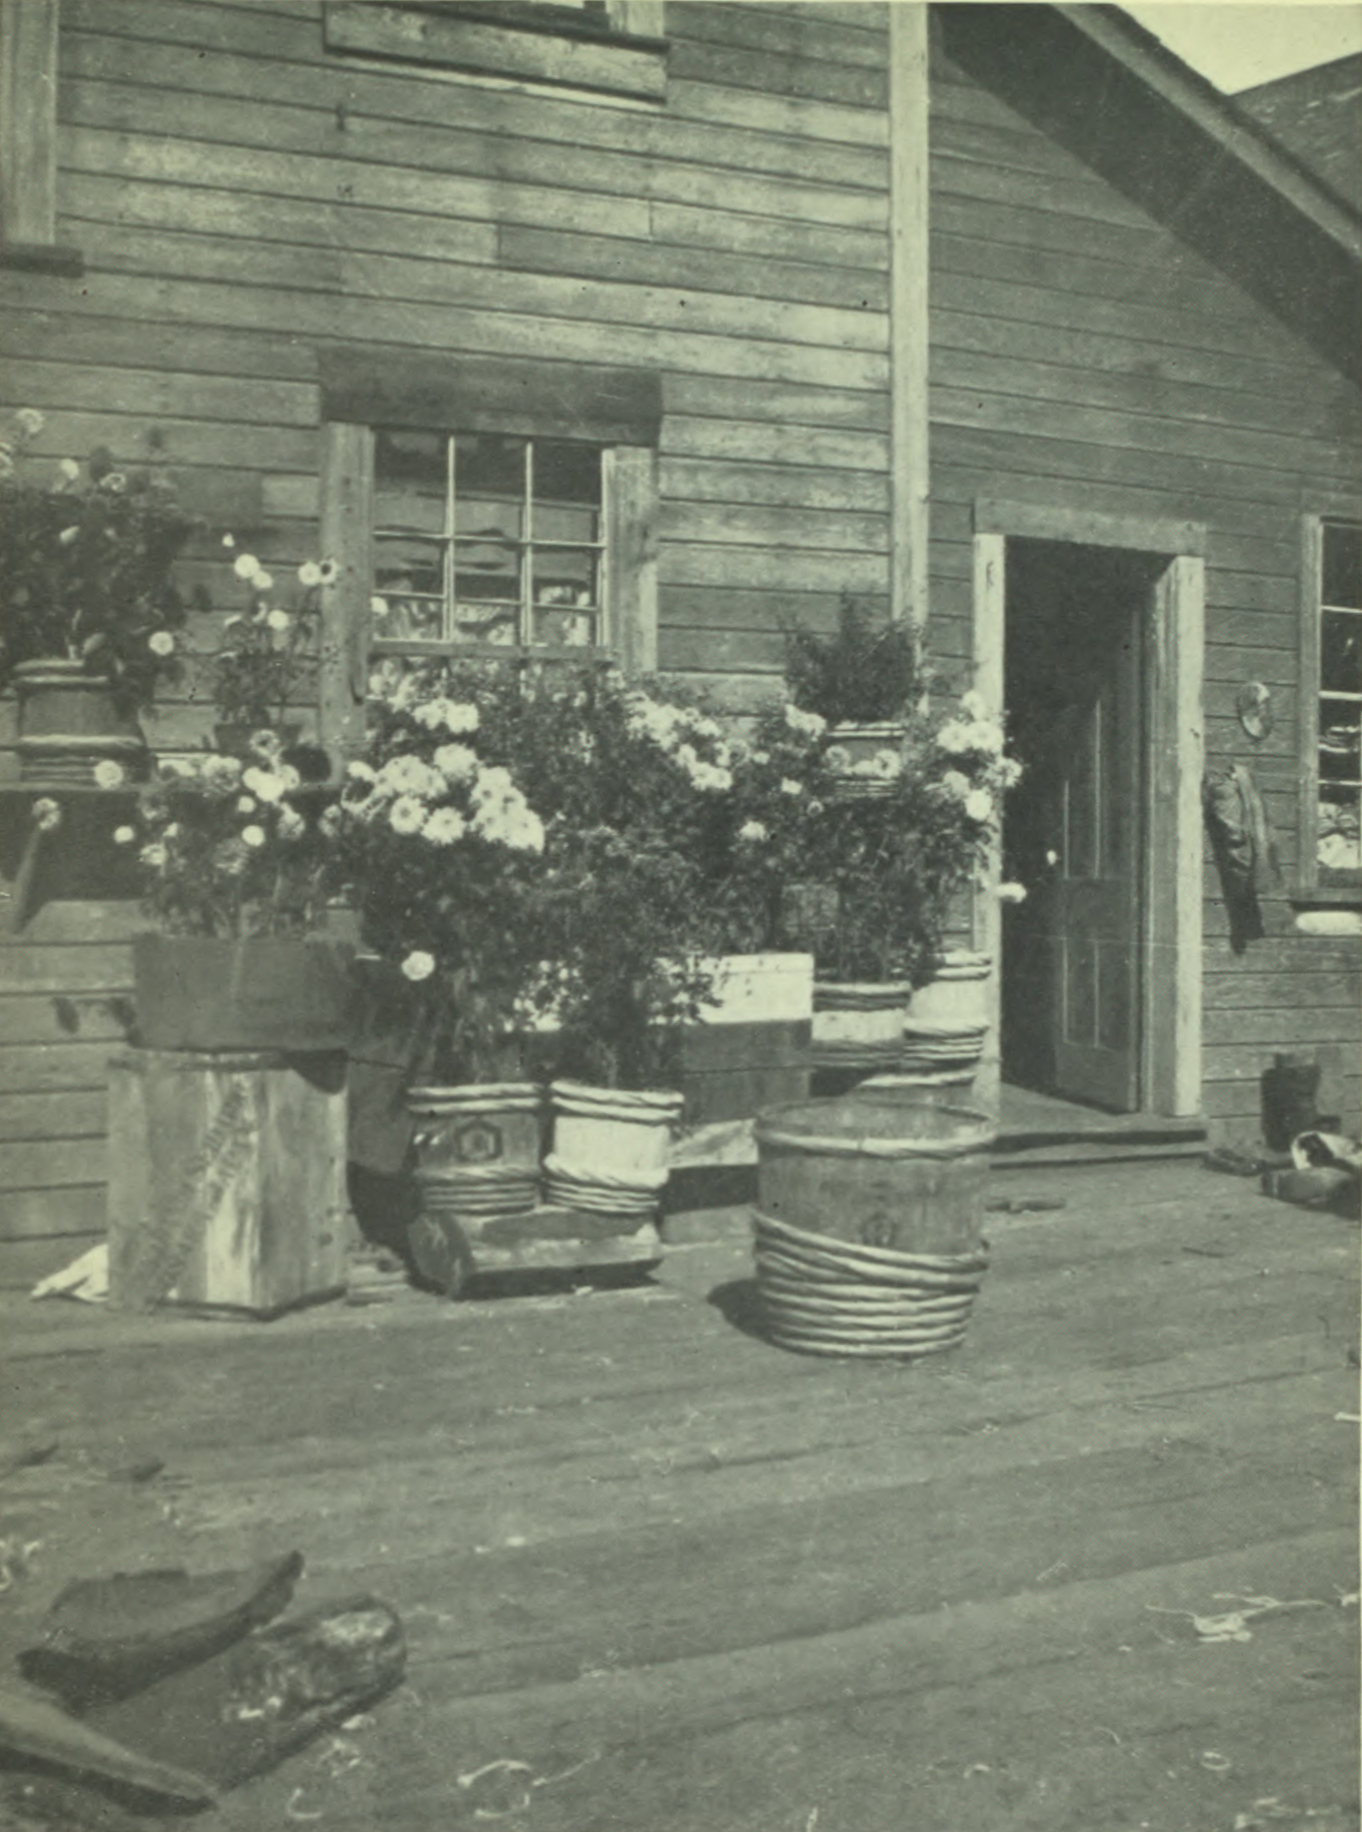 Wooden house with wooden deck with several large pots of crysanthemums.